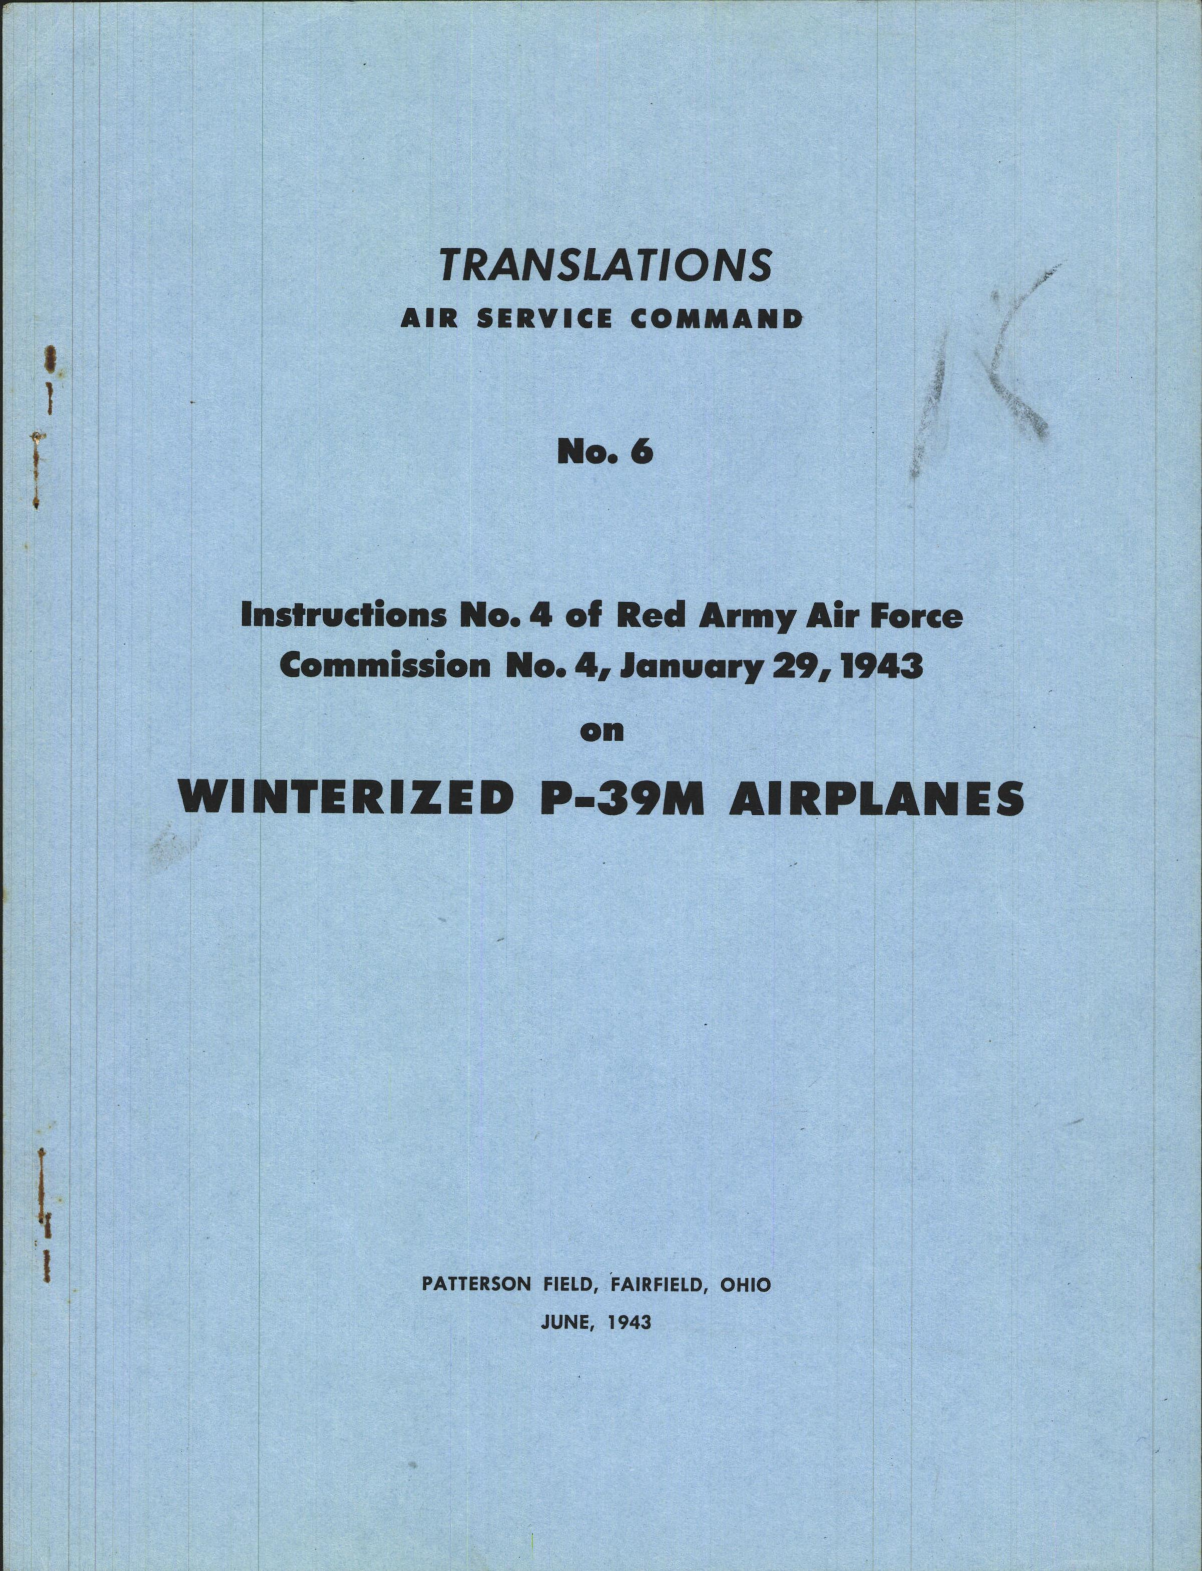 Sample page 1 from AirCorps Library document: Instructions of Red Army Air Force Commission No. 4 on Winterized P-39M Airplanes